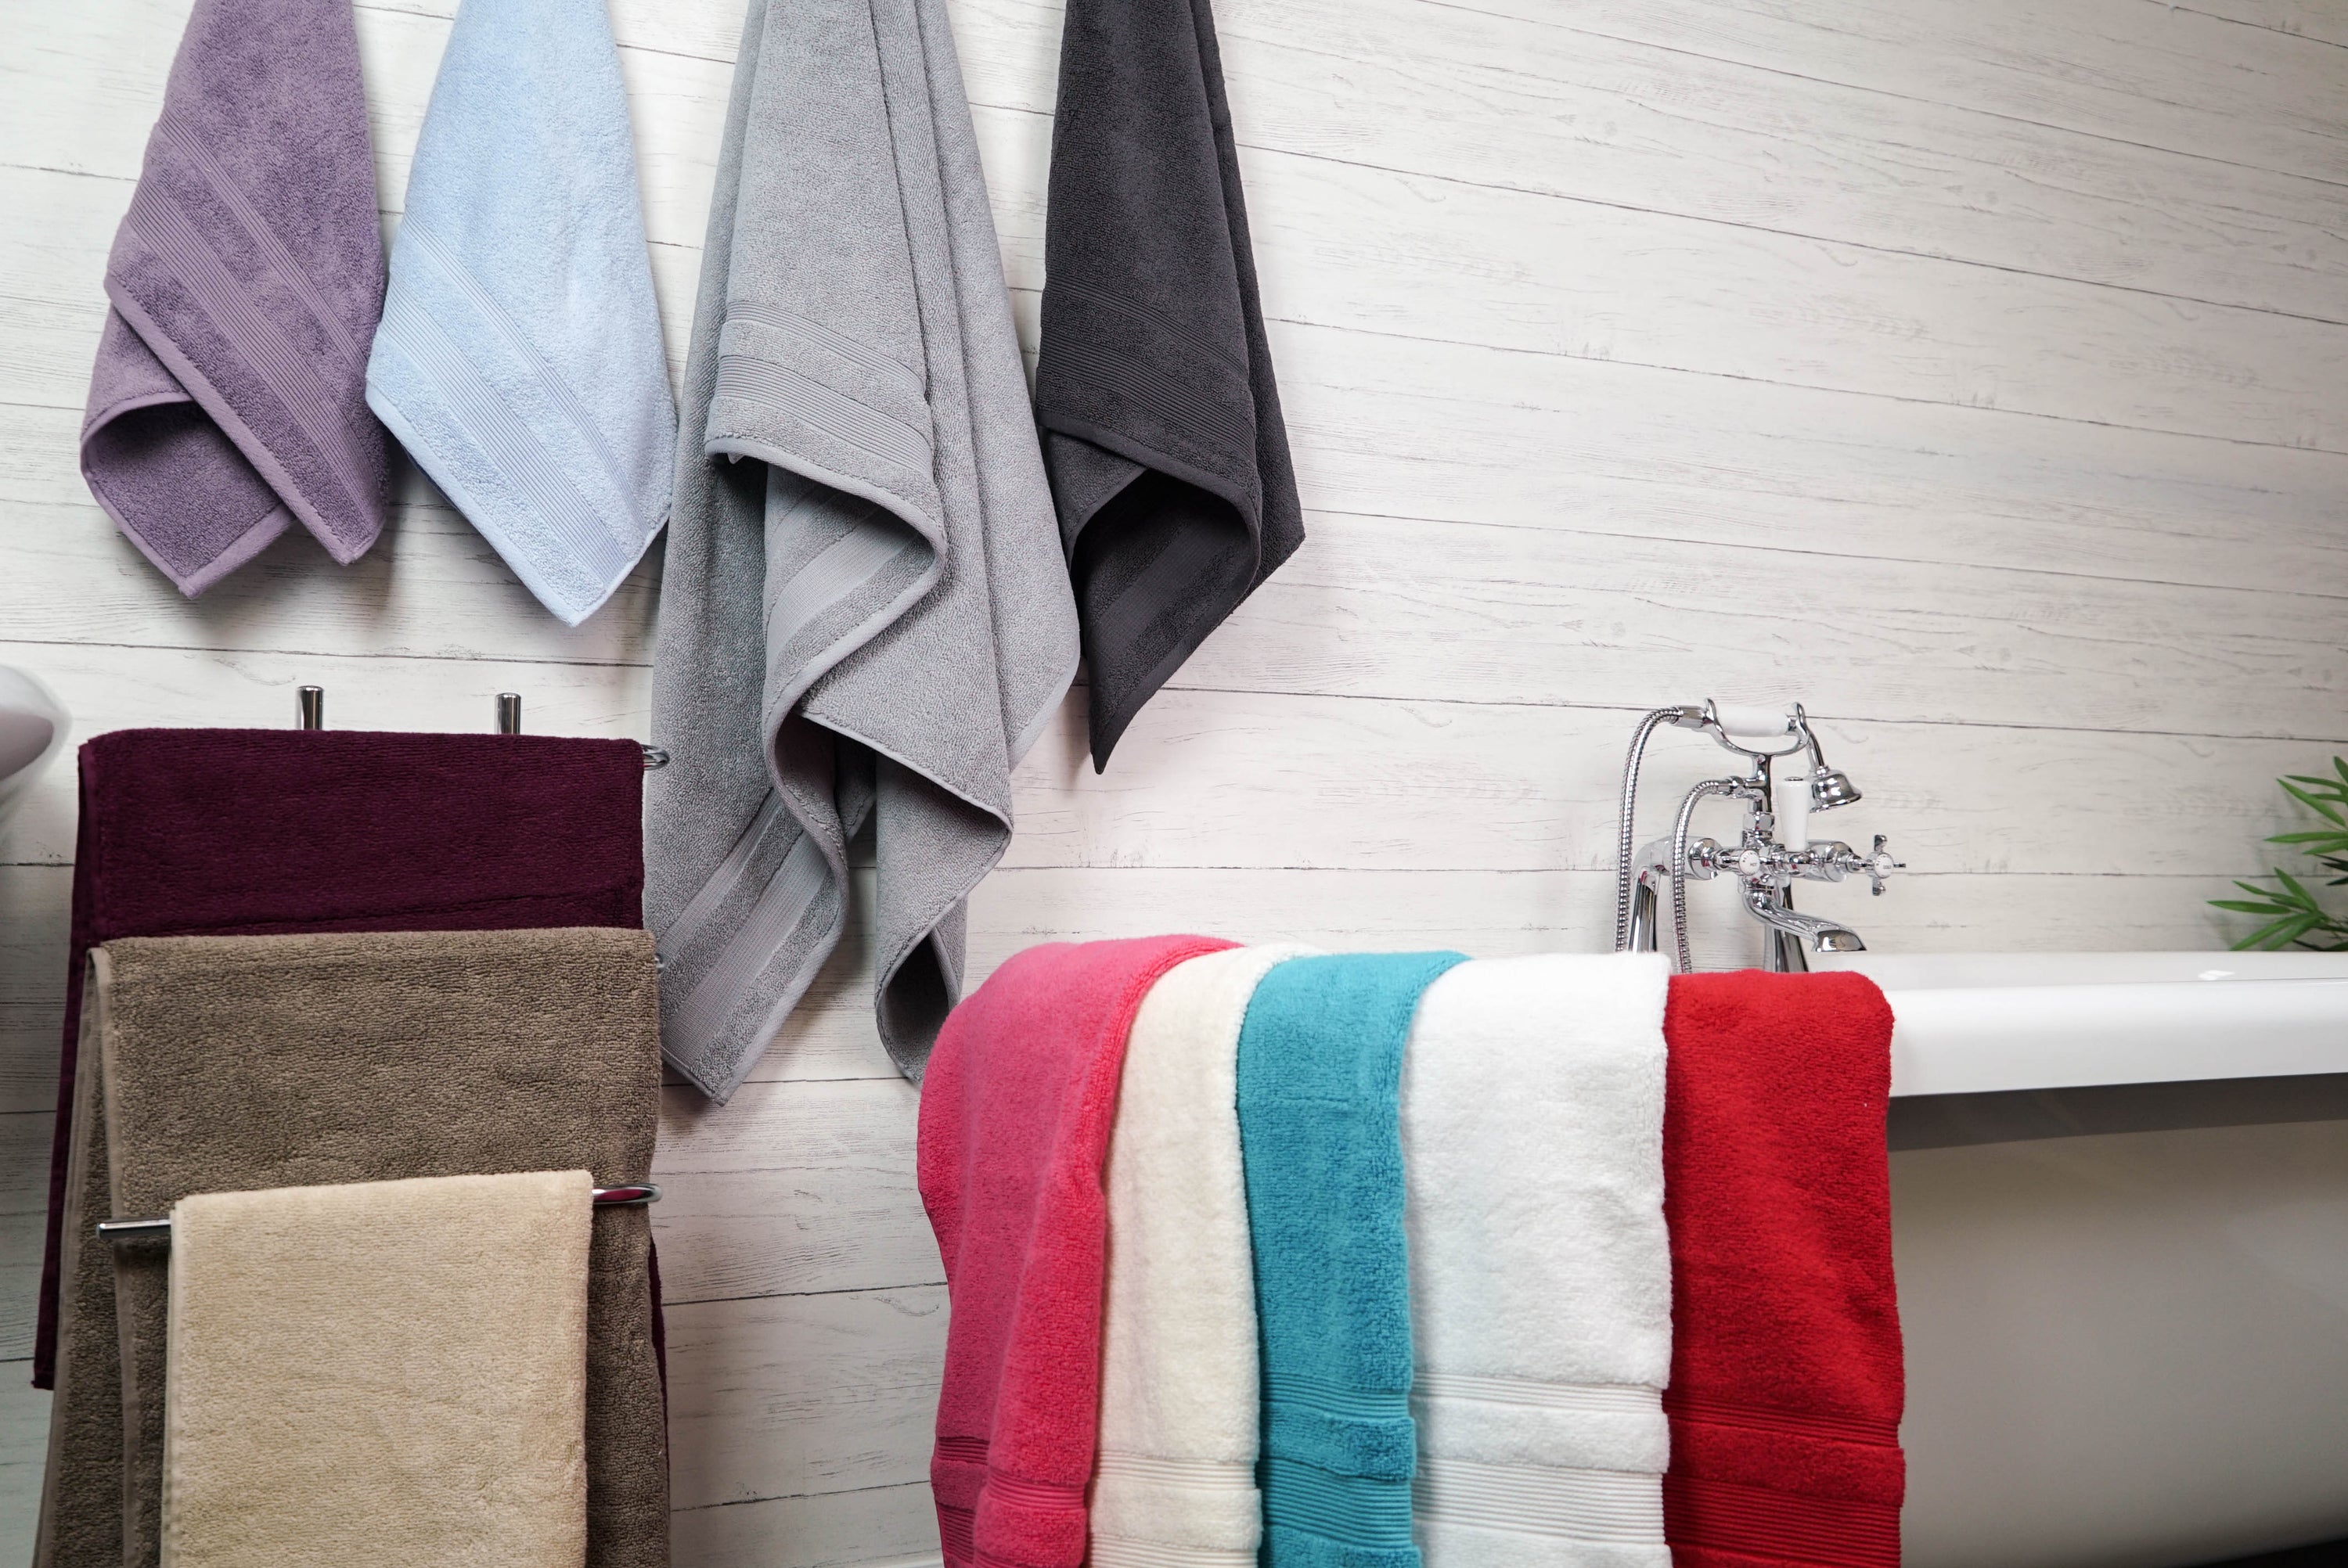 What is the difference between bath sheet vs bath towel ?